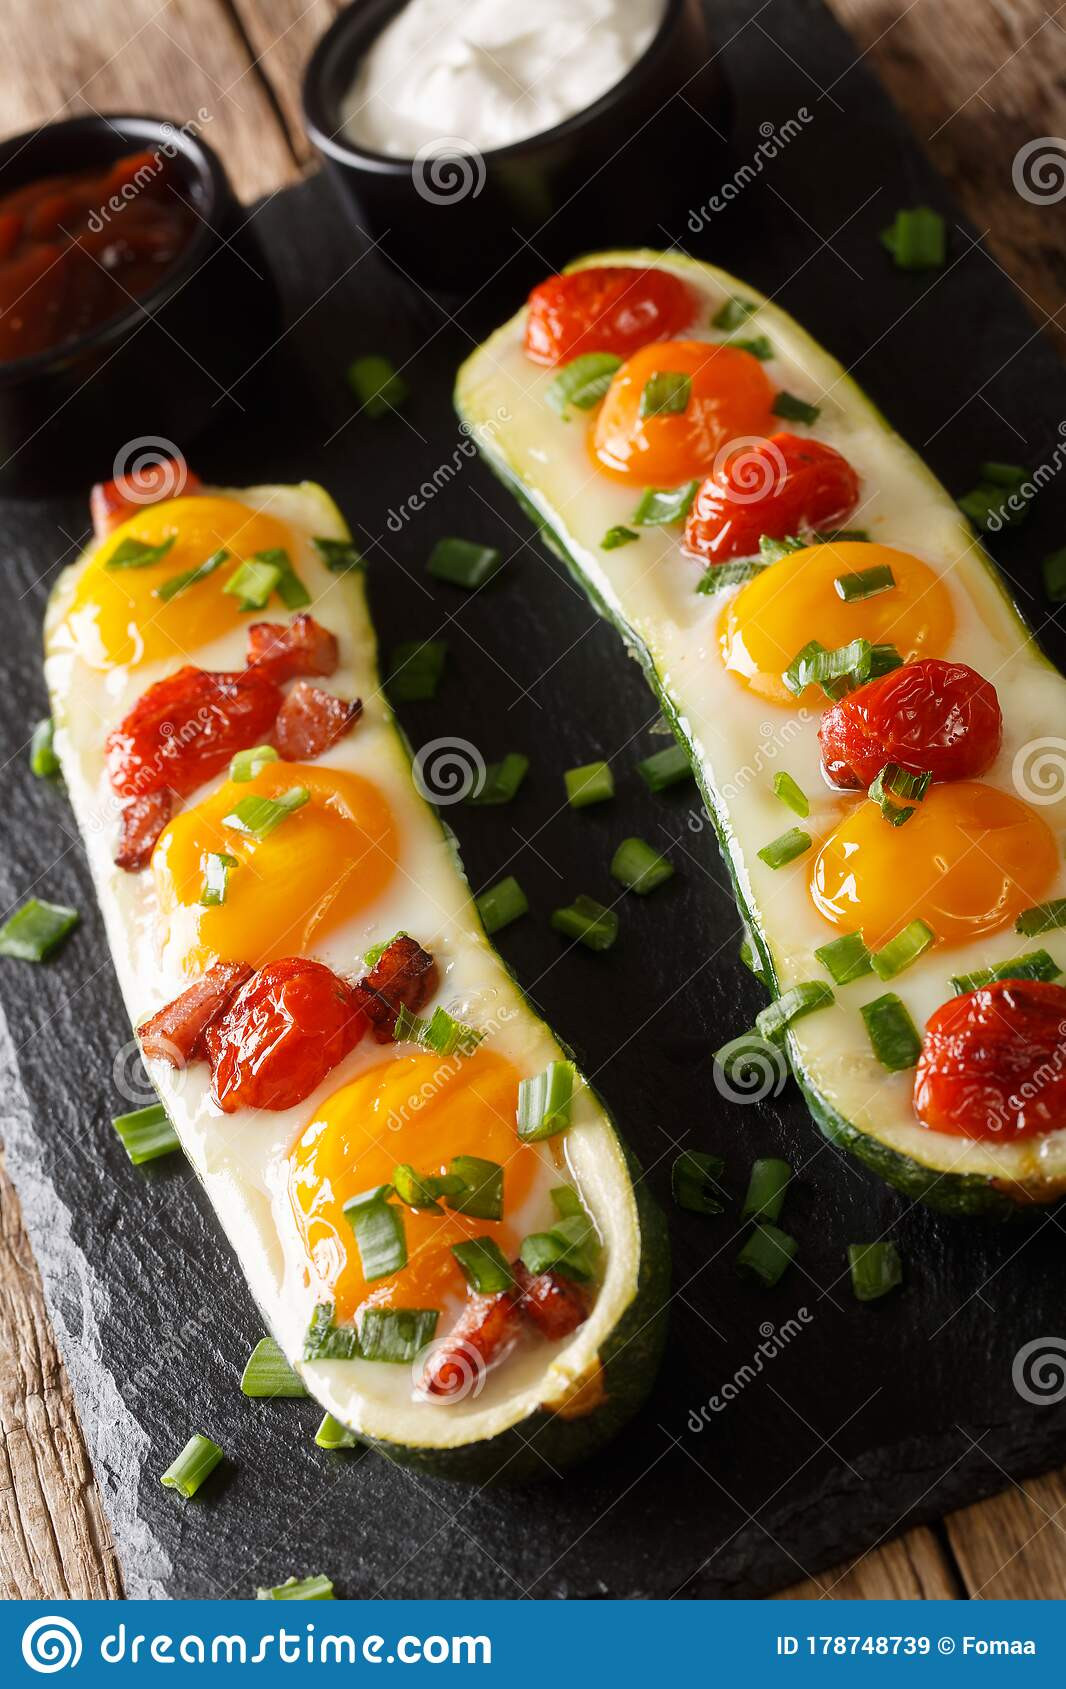 Keto Diet Tomatoes
 Keto Diet Baked Zucchini Stuffed With Eggs And Tomatoes